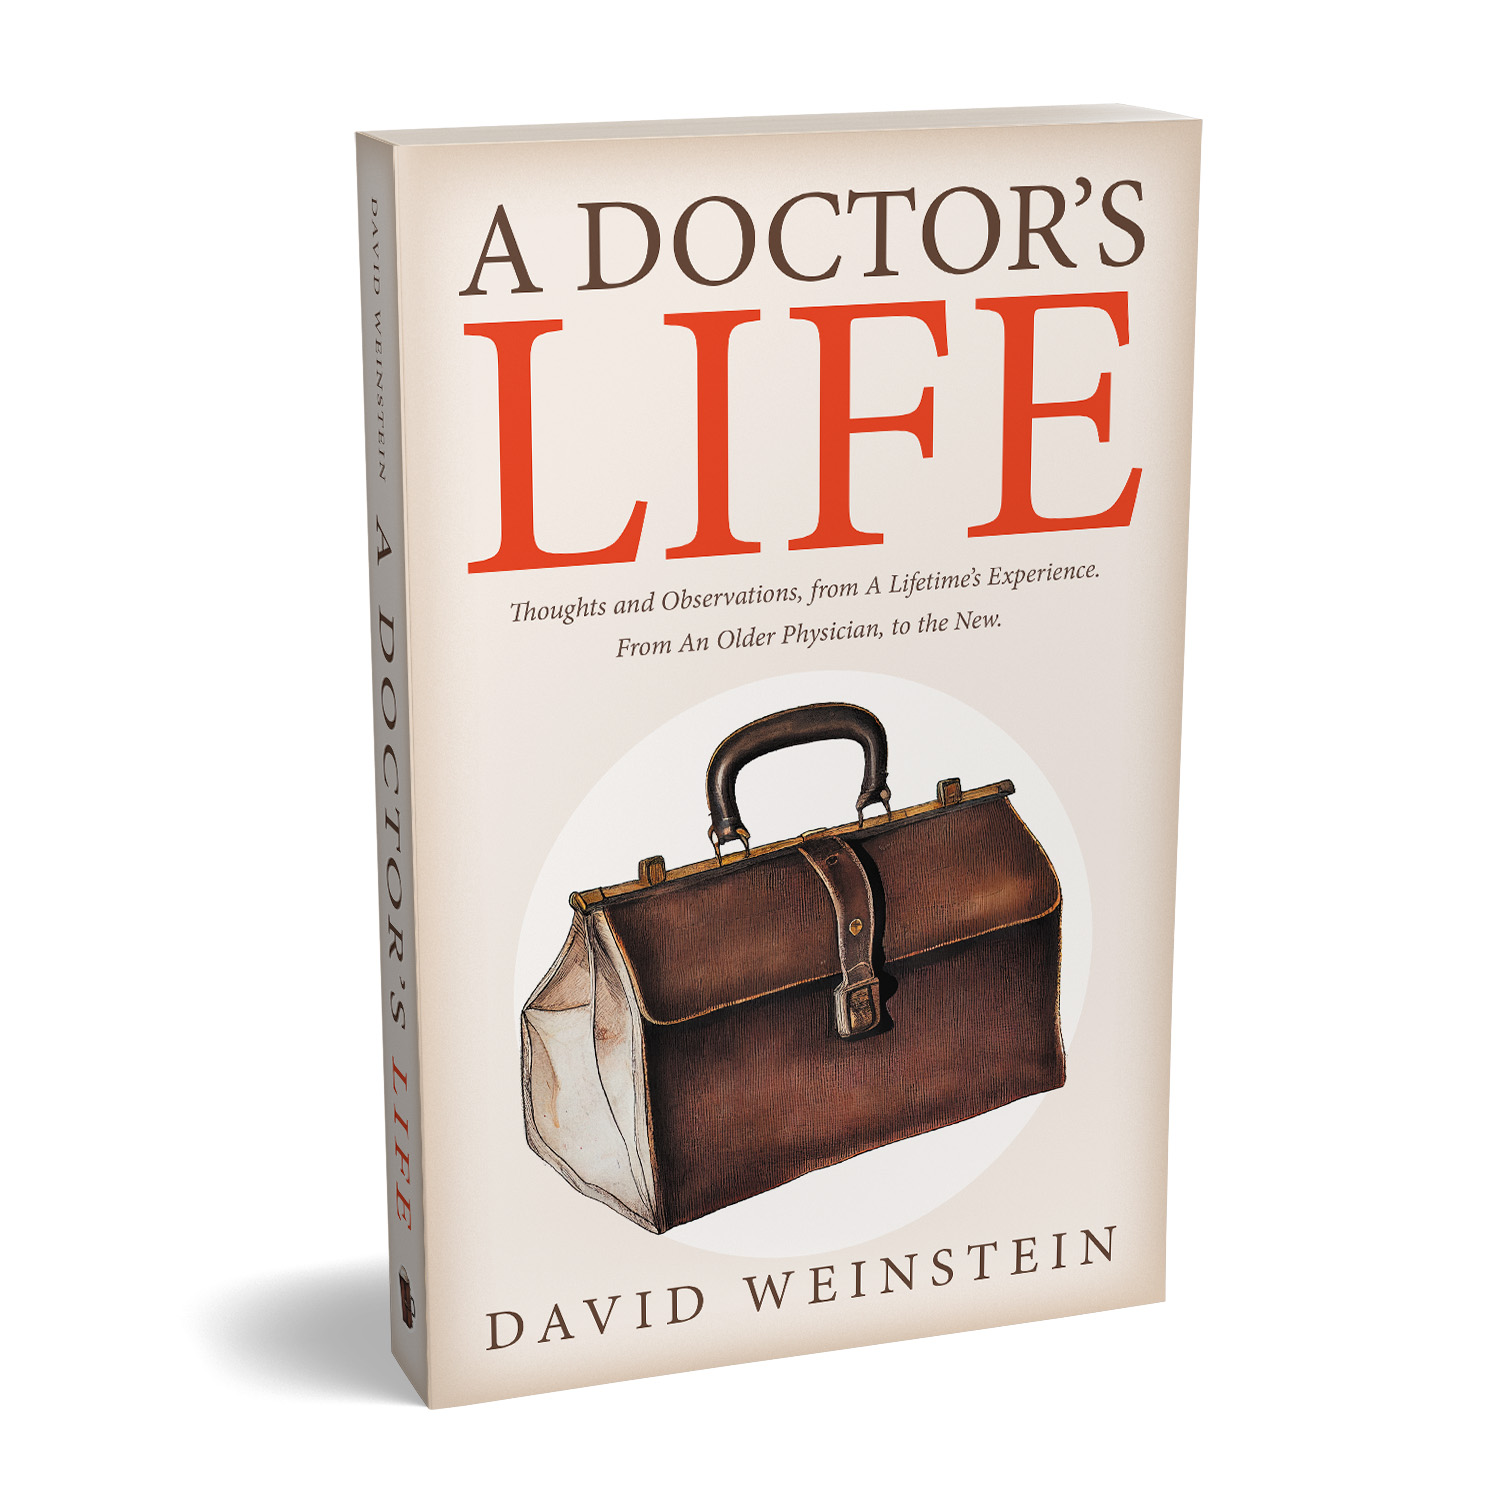 'A Doctor's Life' is a heartfelt and insightful memoir on a life in the medical profession. The author is David Weinstein. The book cover and interior formatting are designed by Mark Thomas of coverness.com. To find out more about my book design services, please visit www.coverness.com